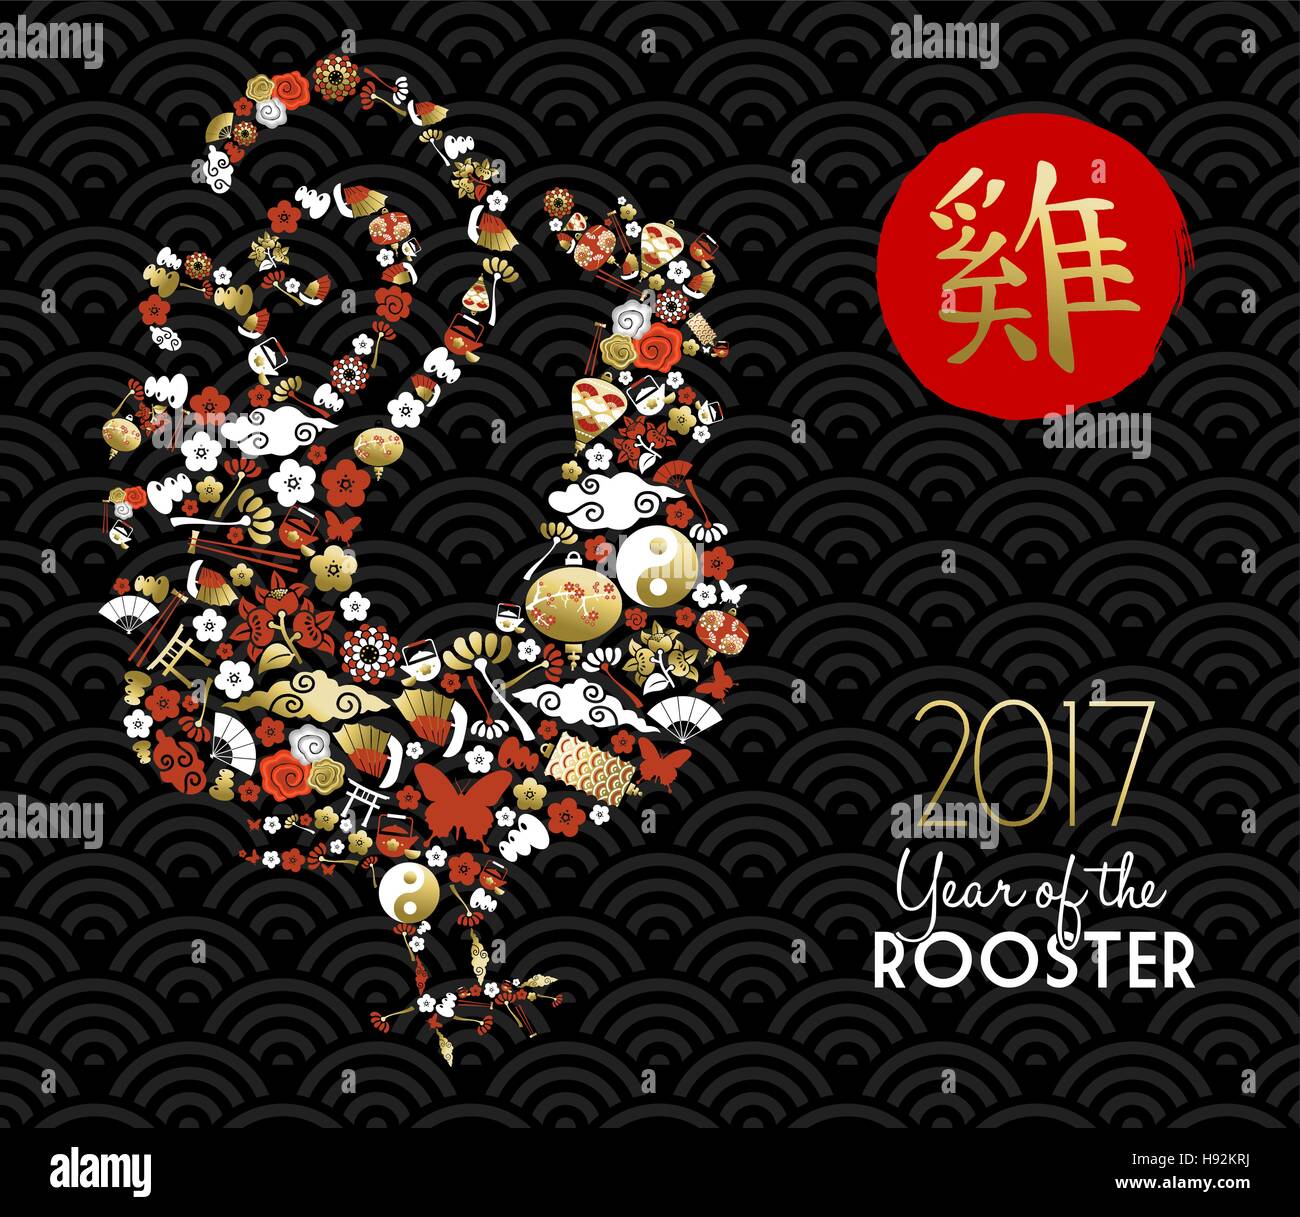 Happy Chinese New Year 2017, design with gold asian culture icons and traditional calligraphy that means Rooster. EPS10 vector. Stock Vector